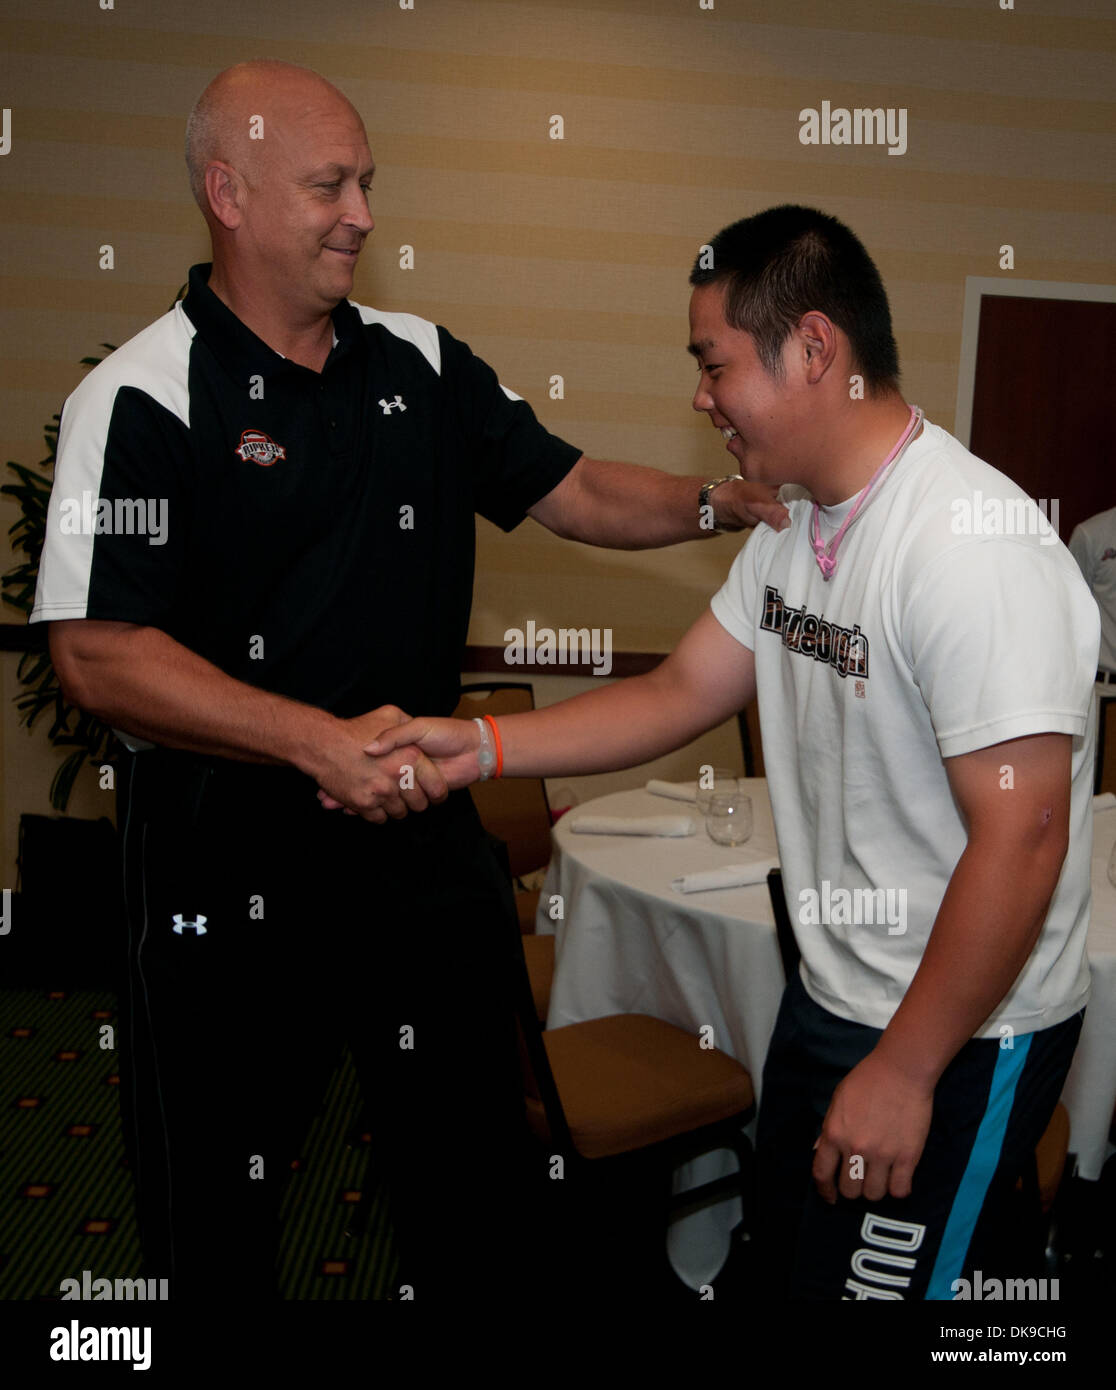 Aug. 17, 2011 - Aberdeen, Maryland, U.S. - Hall of Fame Baseball Player Cal Ripken, Jr. greets high school athletes from earthquake affected areas of Japan who are in the U.S. as part of the Sports United Visitors Program.  Ripken was designated a Special Public Diplomacy Envoy  to the U.S. State Department. Today's visit was part of his mission to use baseball as a tool to spread  Stock Photo